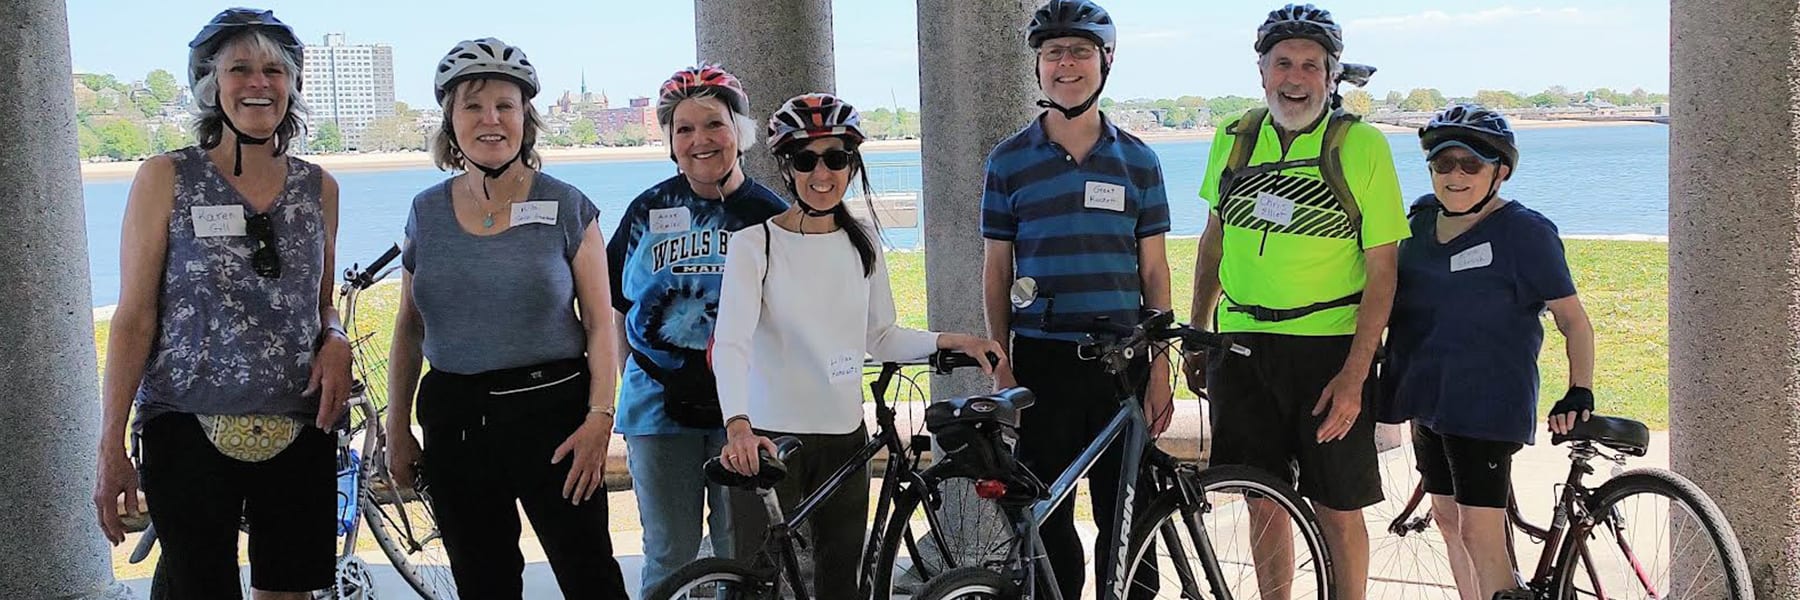 Older adults pose with bikes on the Harborwalk.